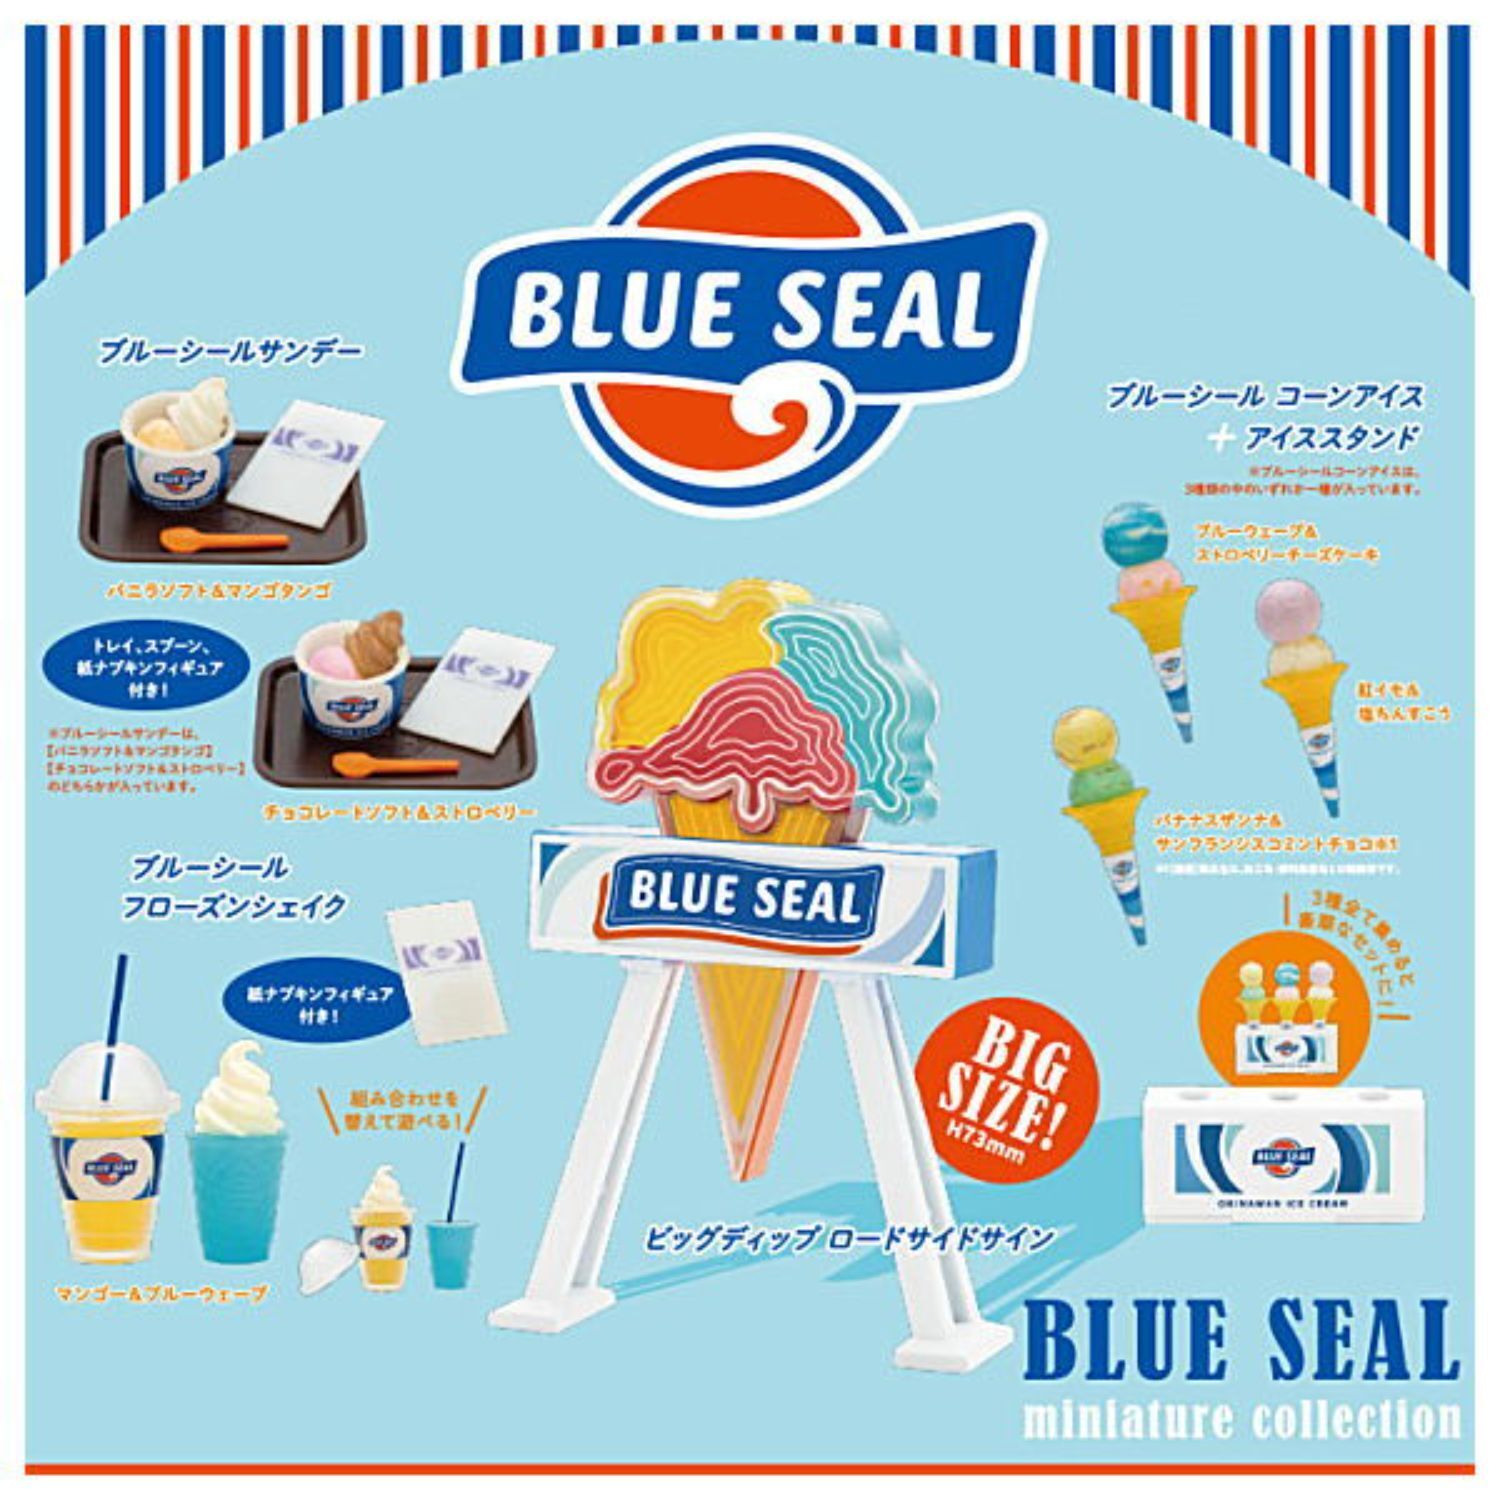 BLUE SEAL Miniature Collection Capsule Toy 7 Types Full Comp Set Gacha Mascot